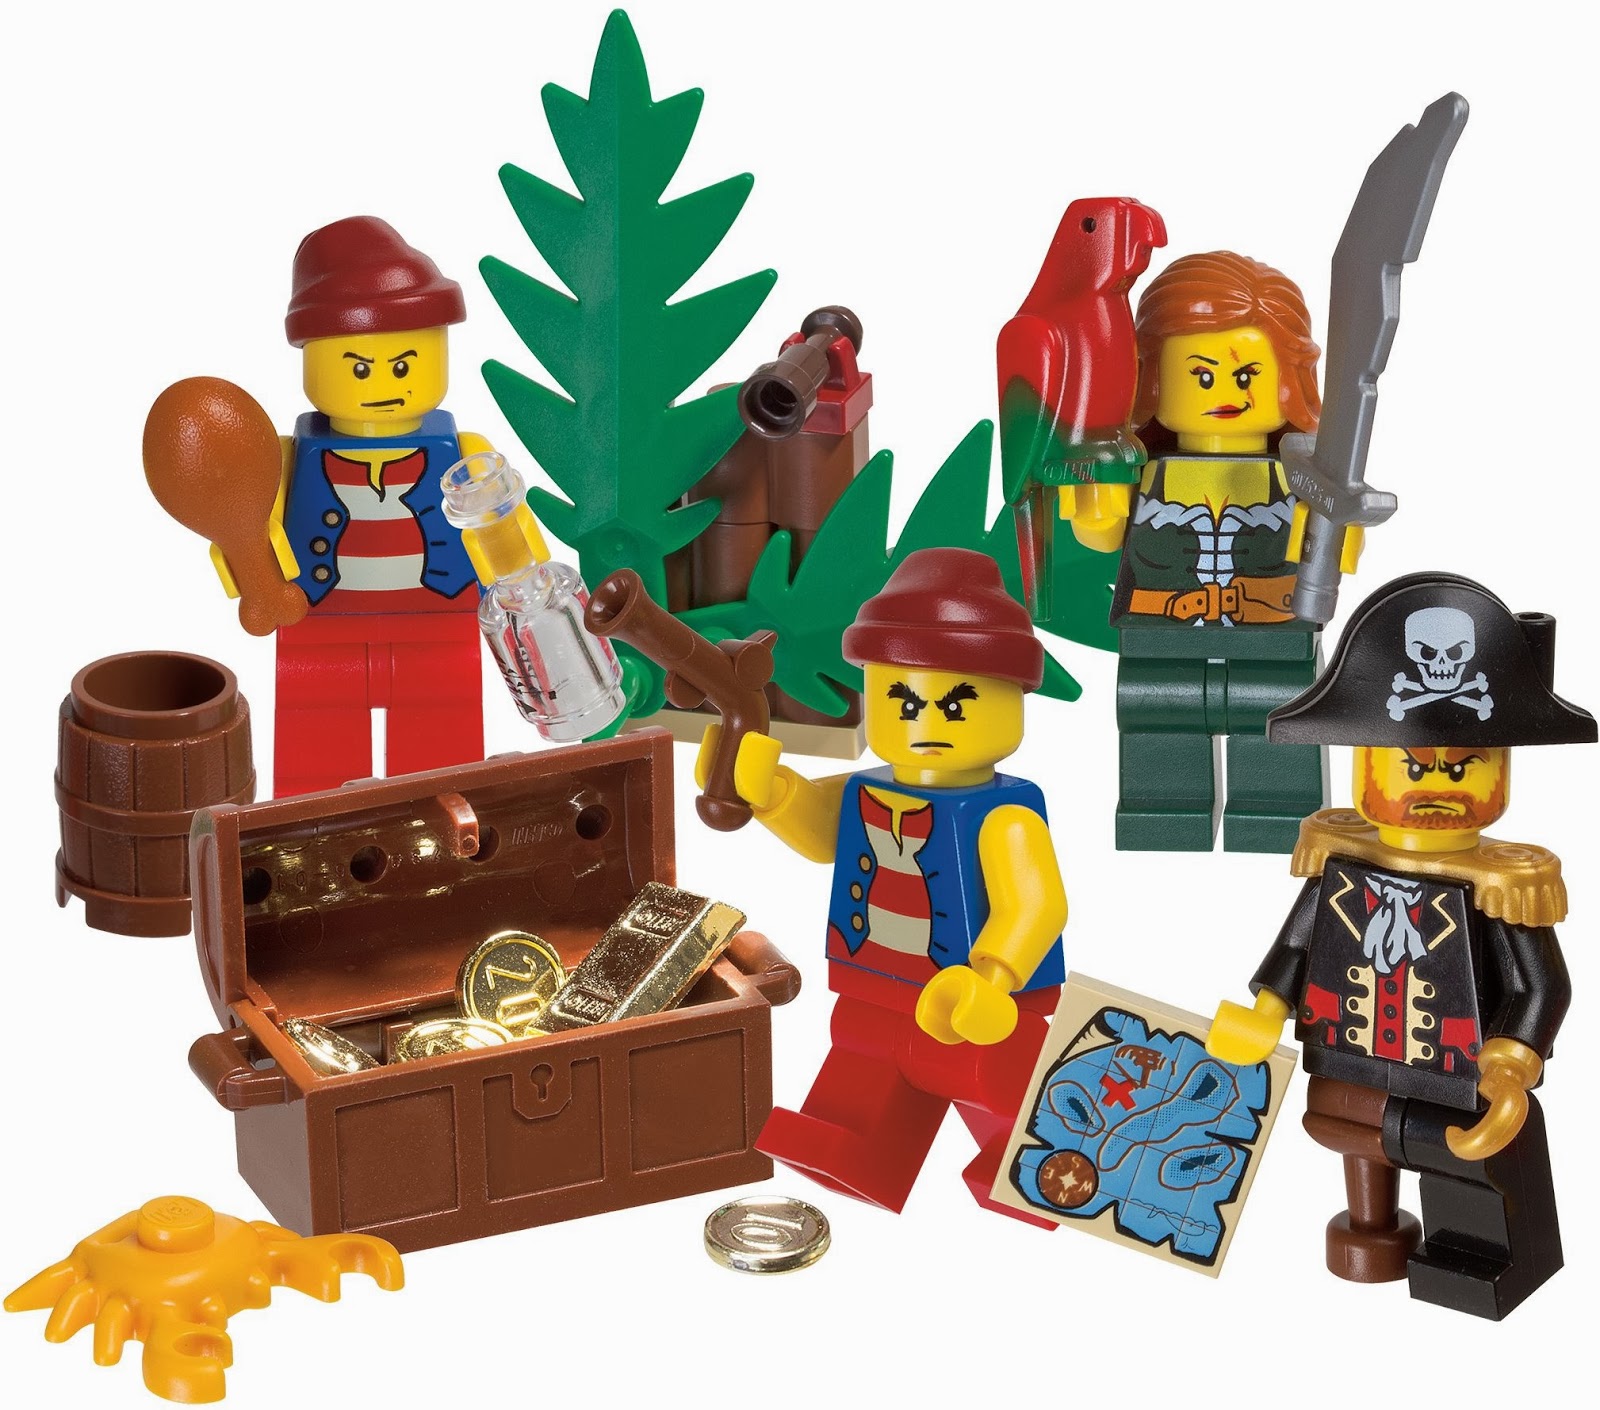 All About Bricks: Pirates to Return in 2015?